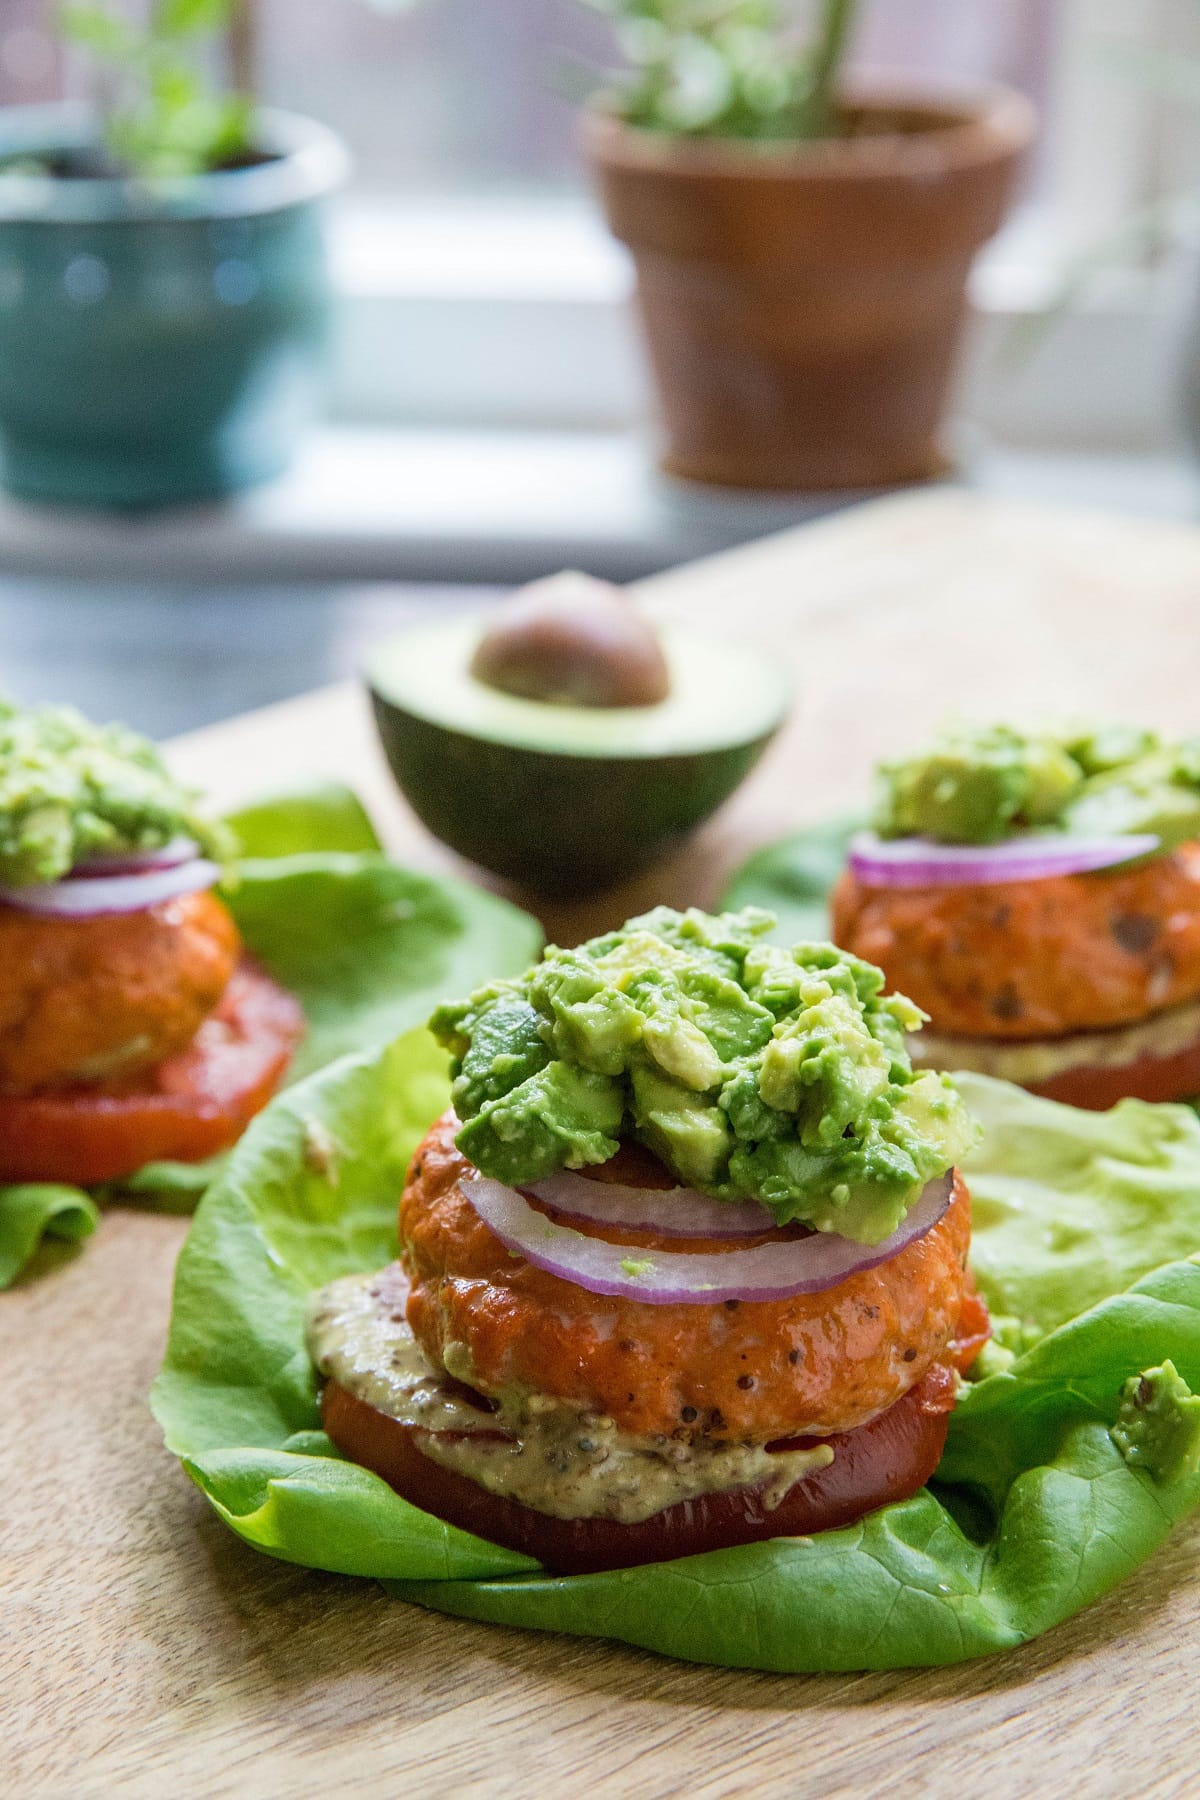 Baked salmon burgers on a lettuce bun with toppings